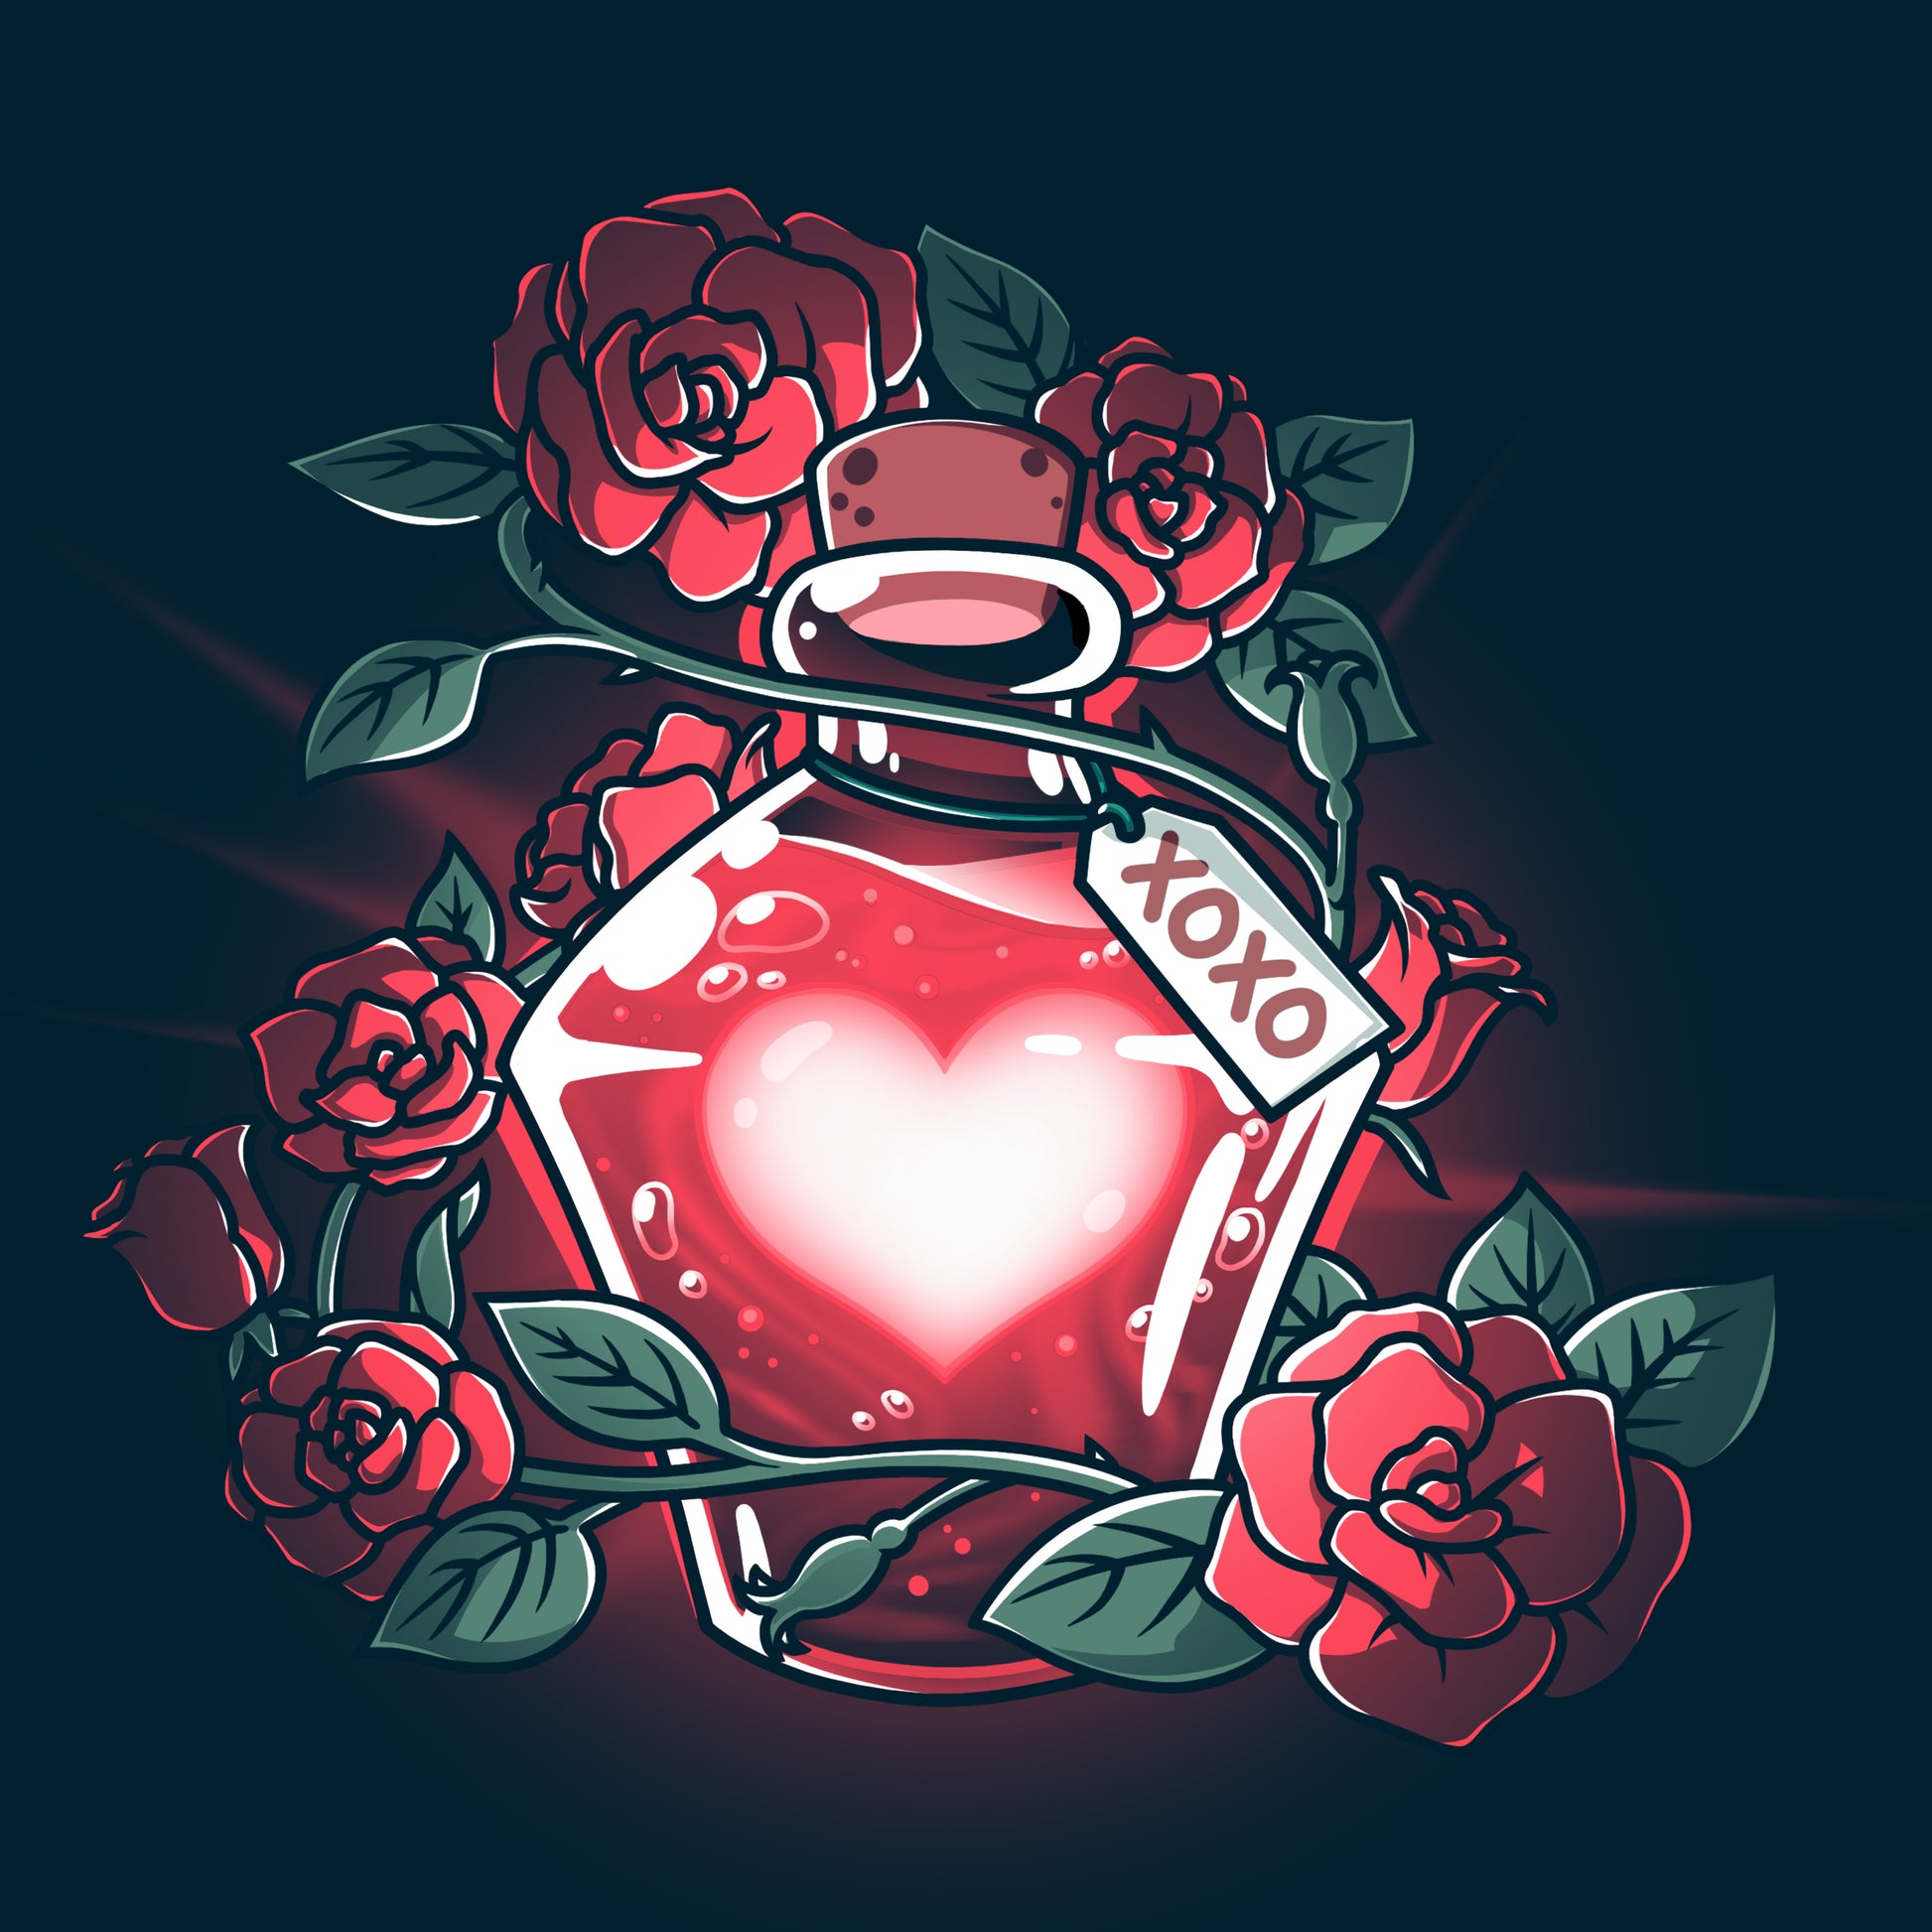 A navy blue Love Potion bottle with roses and a heart inside, made by TeeTurtle.